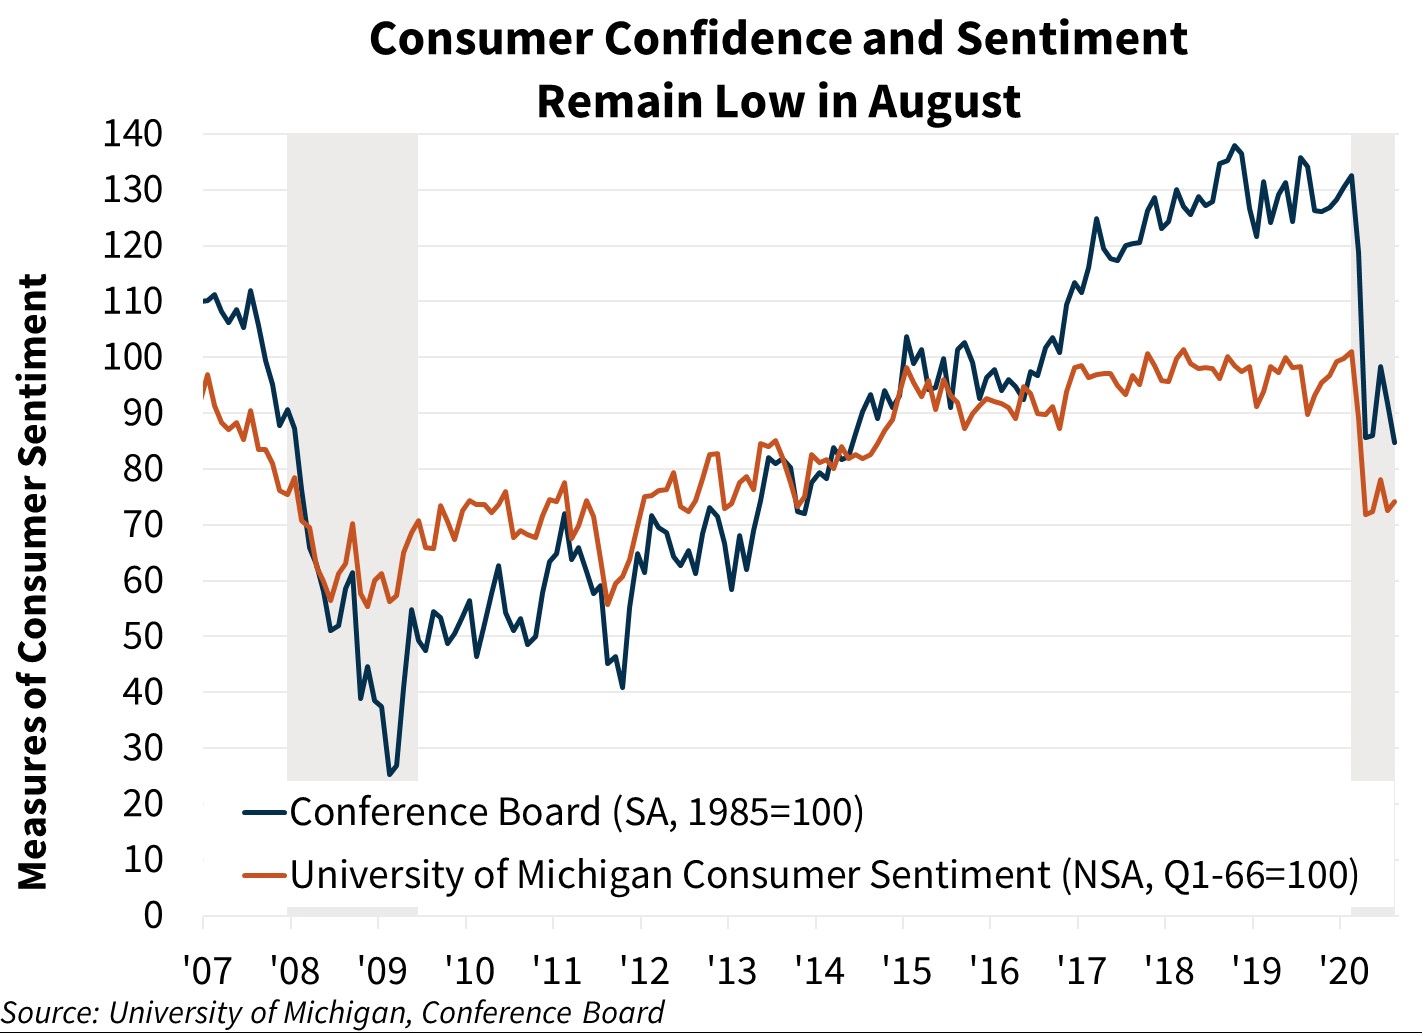  Consumer Confidence and Sentiment Remain Low in August 